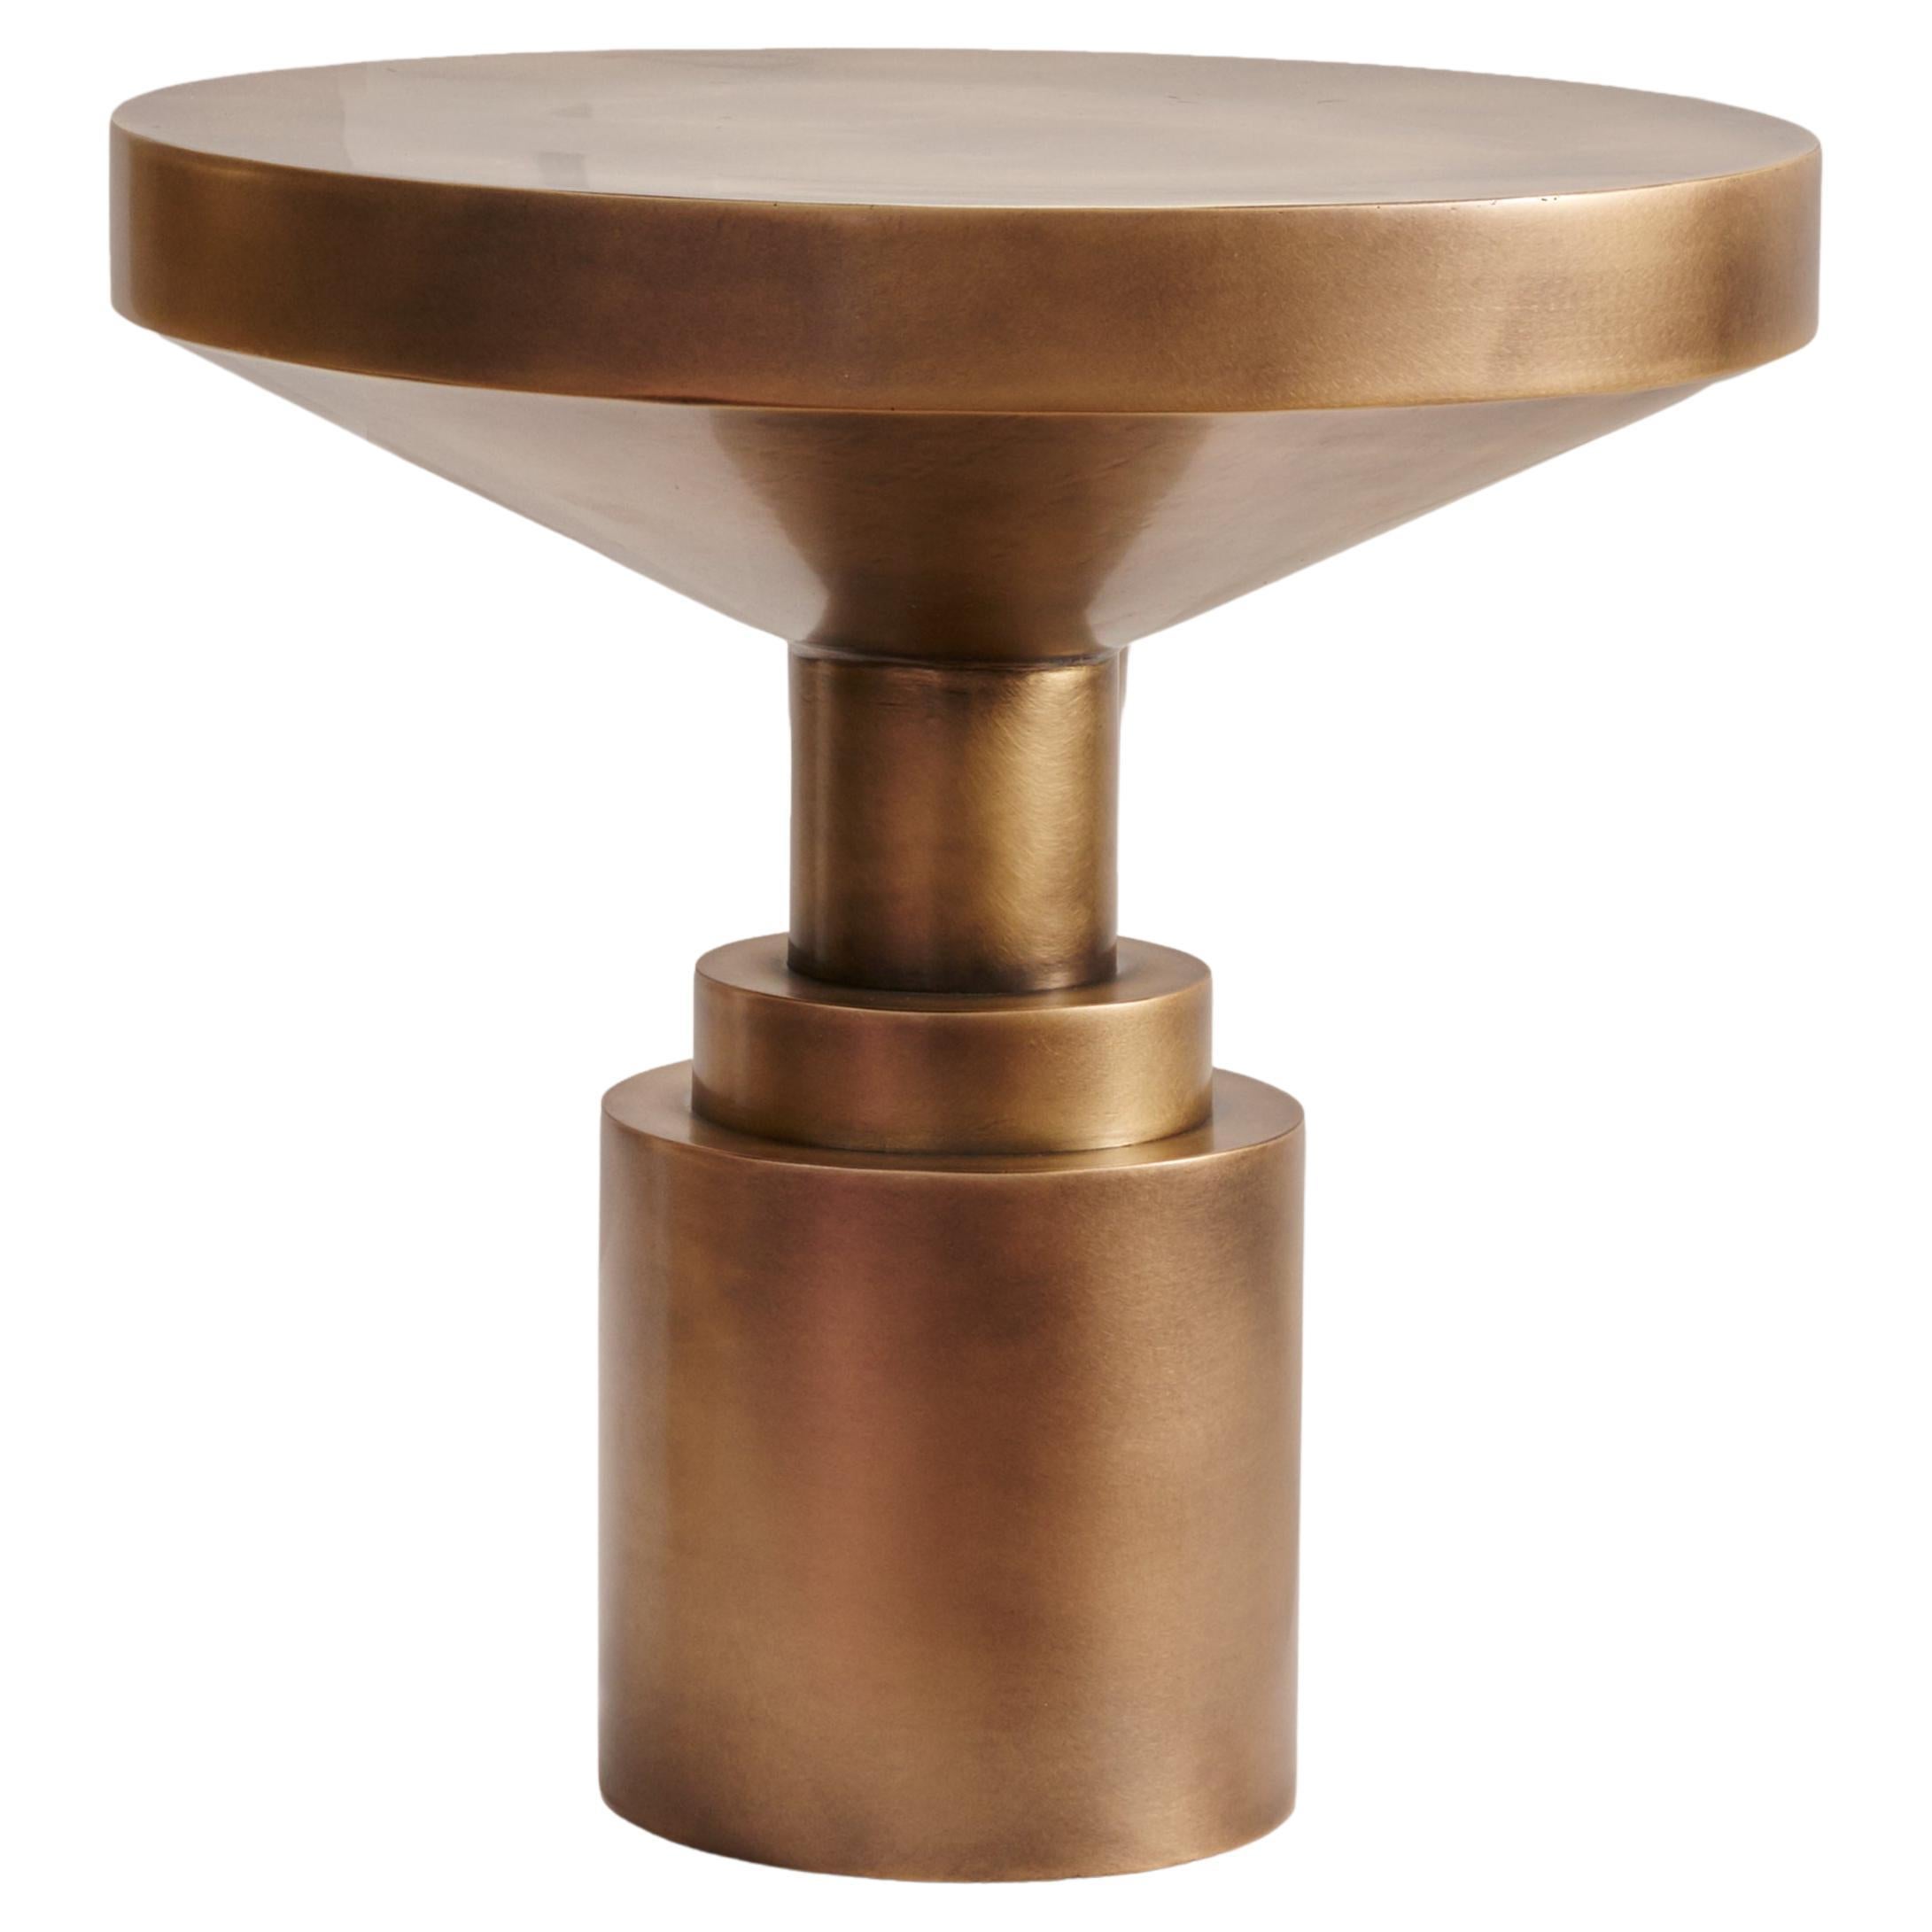 Anna Karlin Chess Piece Side Table For Sale